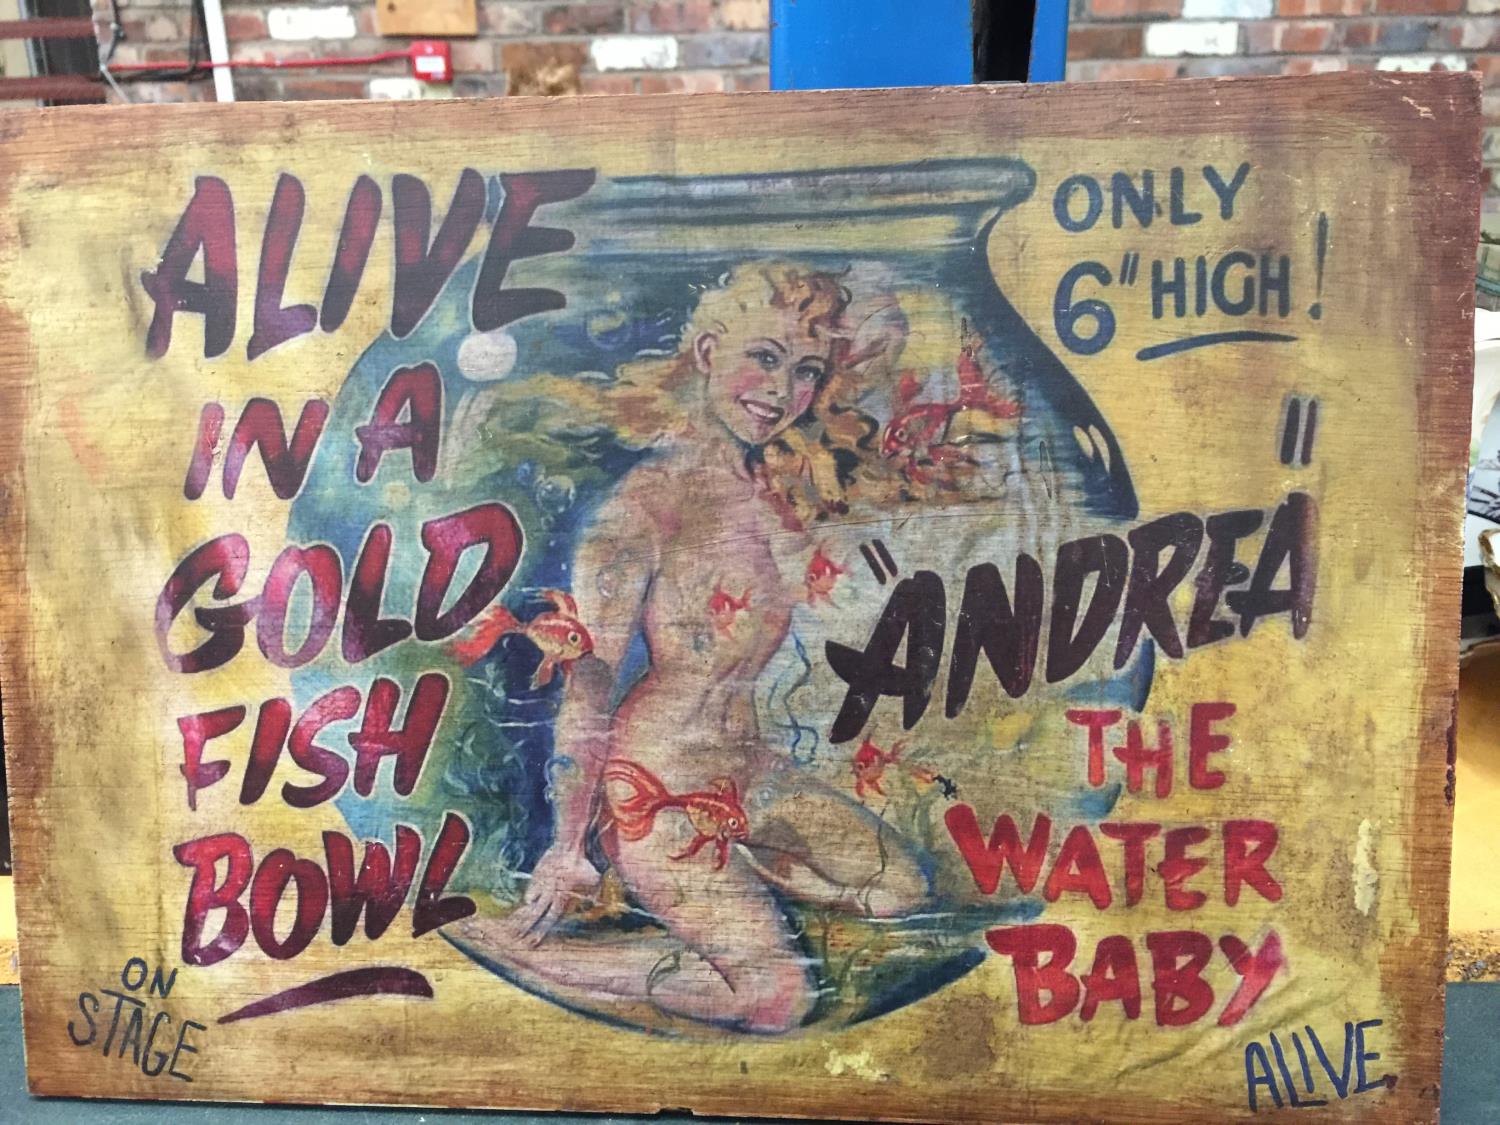 A WOODEN CIRCUS SIGN FEATURING ANDREA THE WATER BABY ALIVE IN A GOLDFISH BOWL